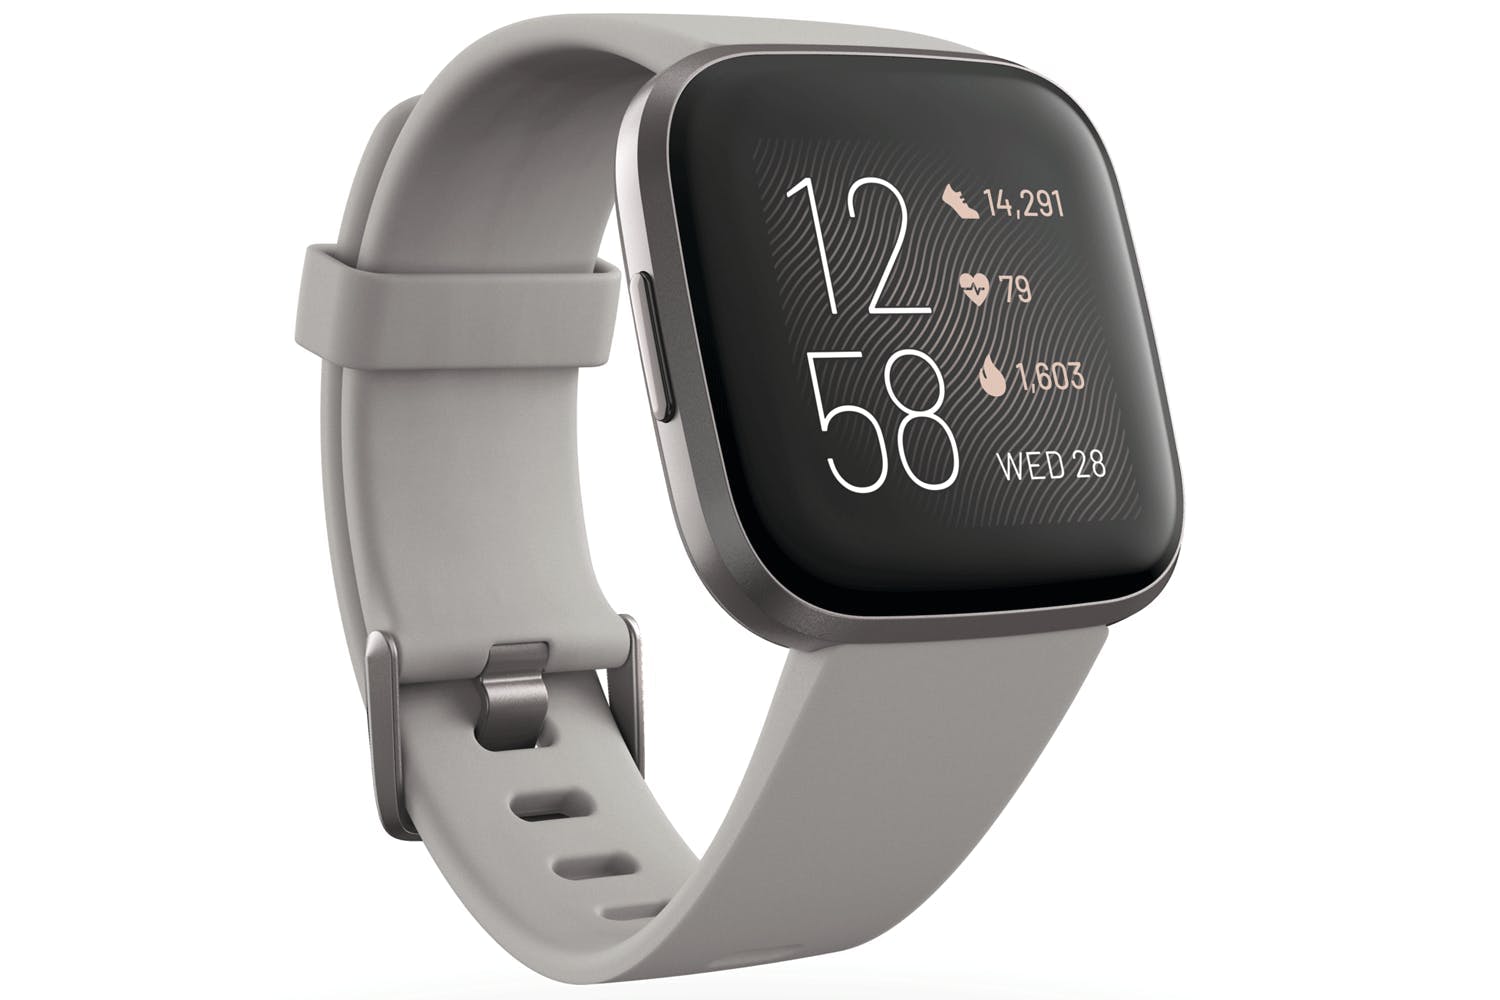 fitbit versa 2 and airpods